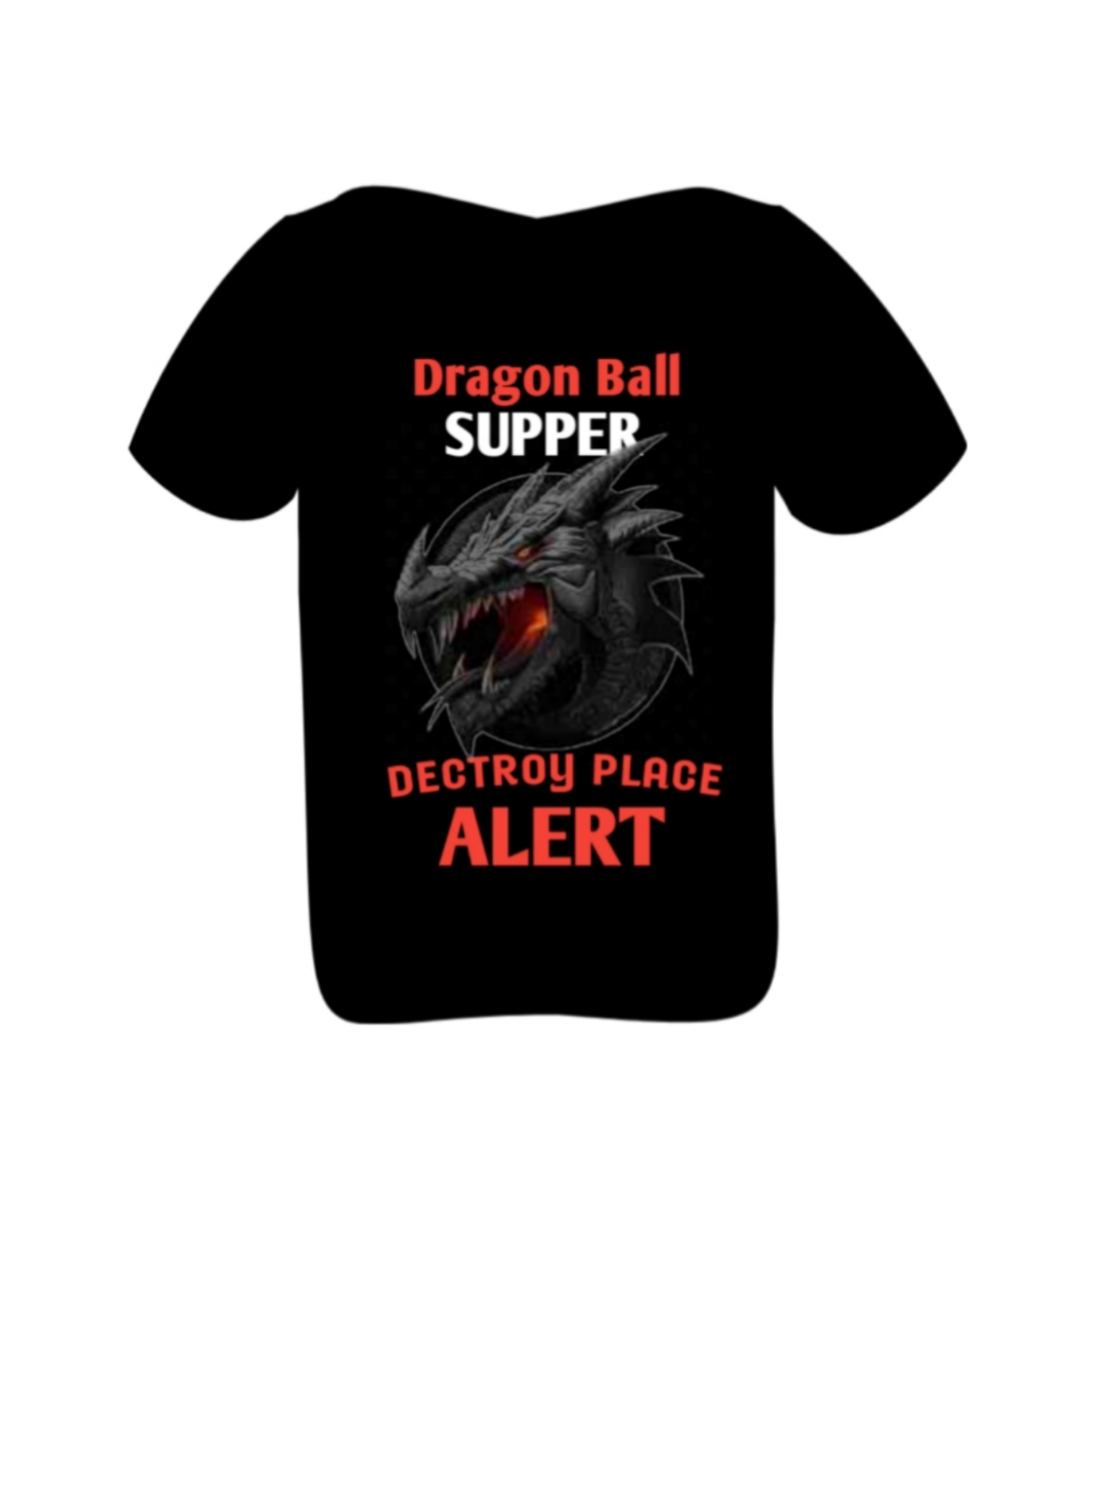 T-shirts design, graphic design, dragon Ball supper pinterest preview image.